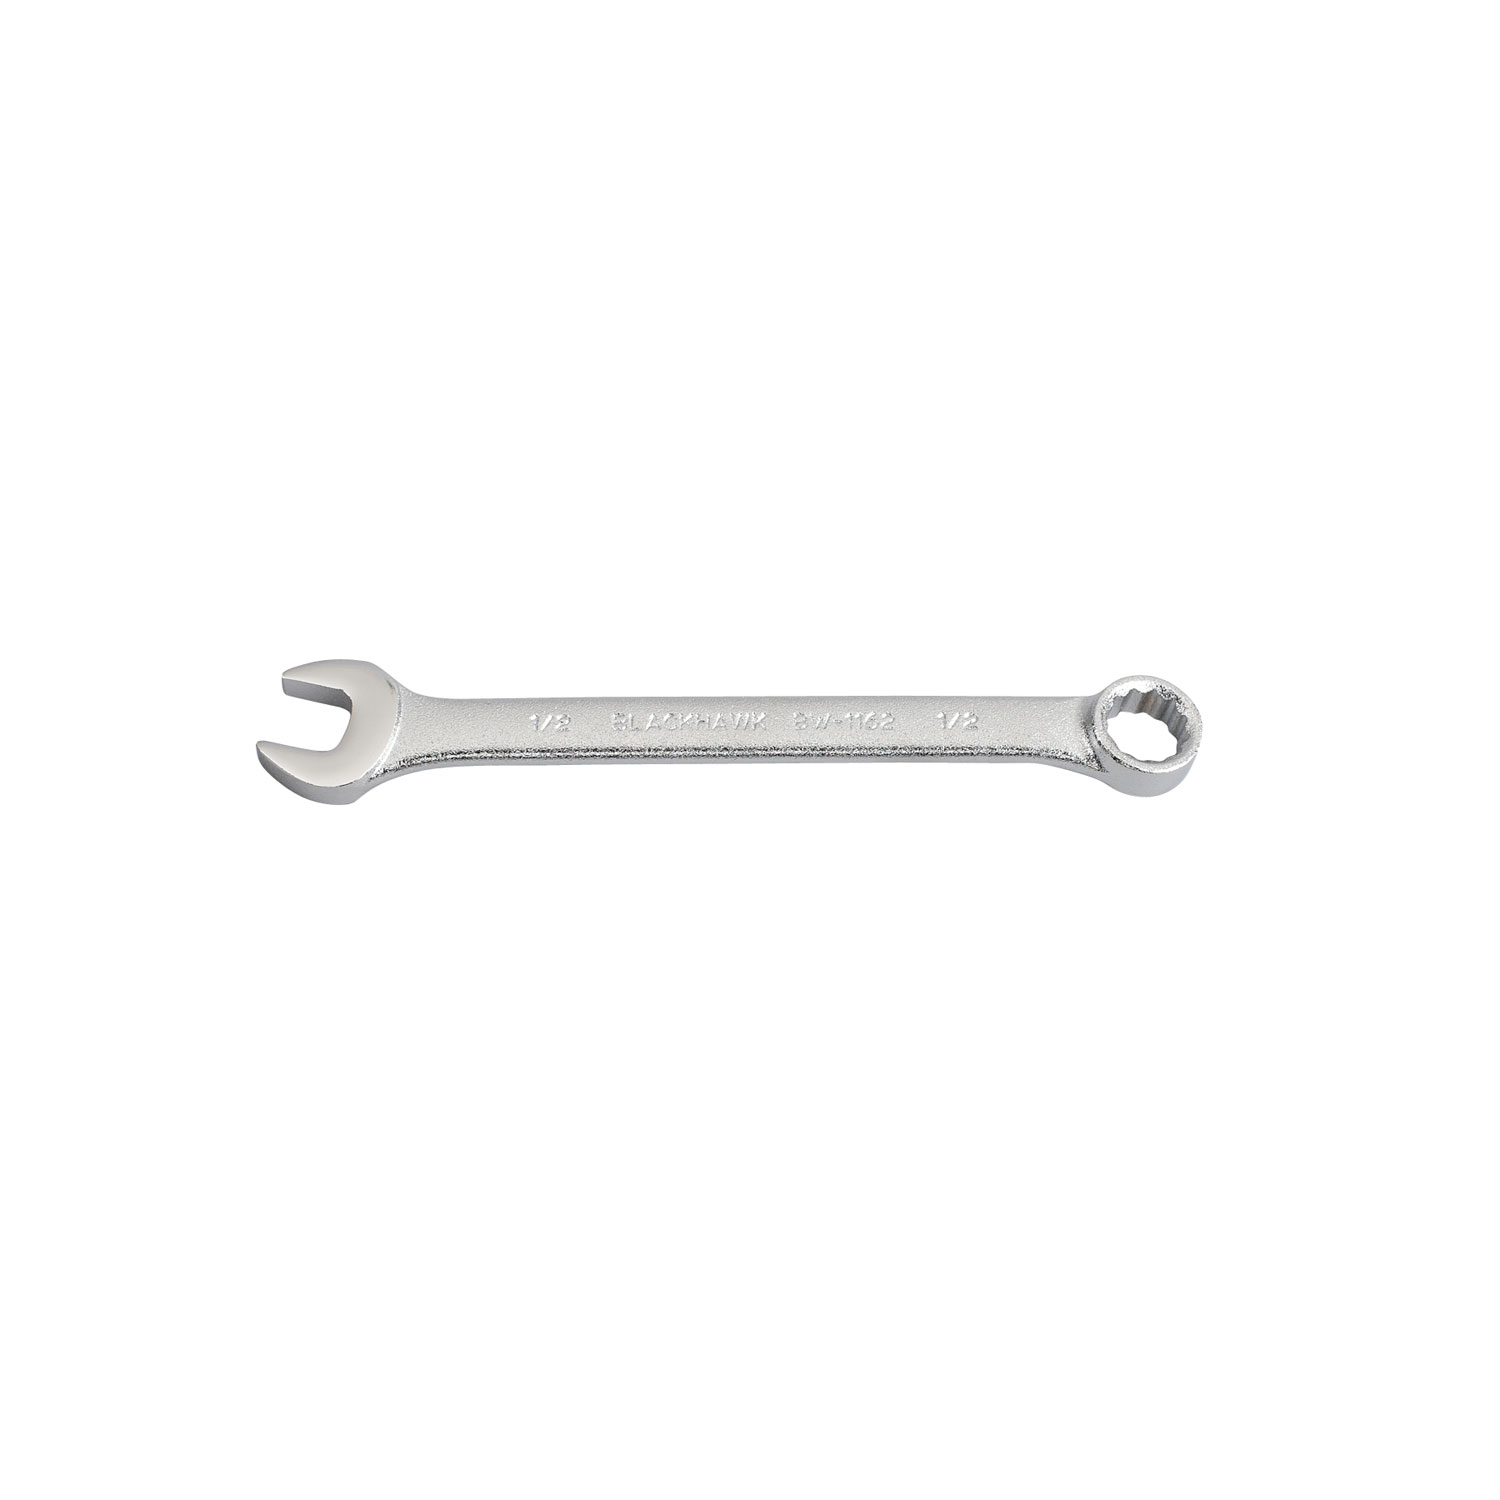 12-Point Fractional Combination Wrench, 1/2, Matte Finish